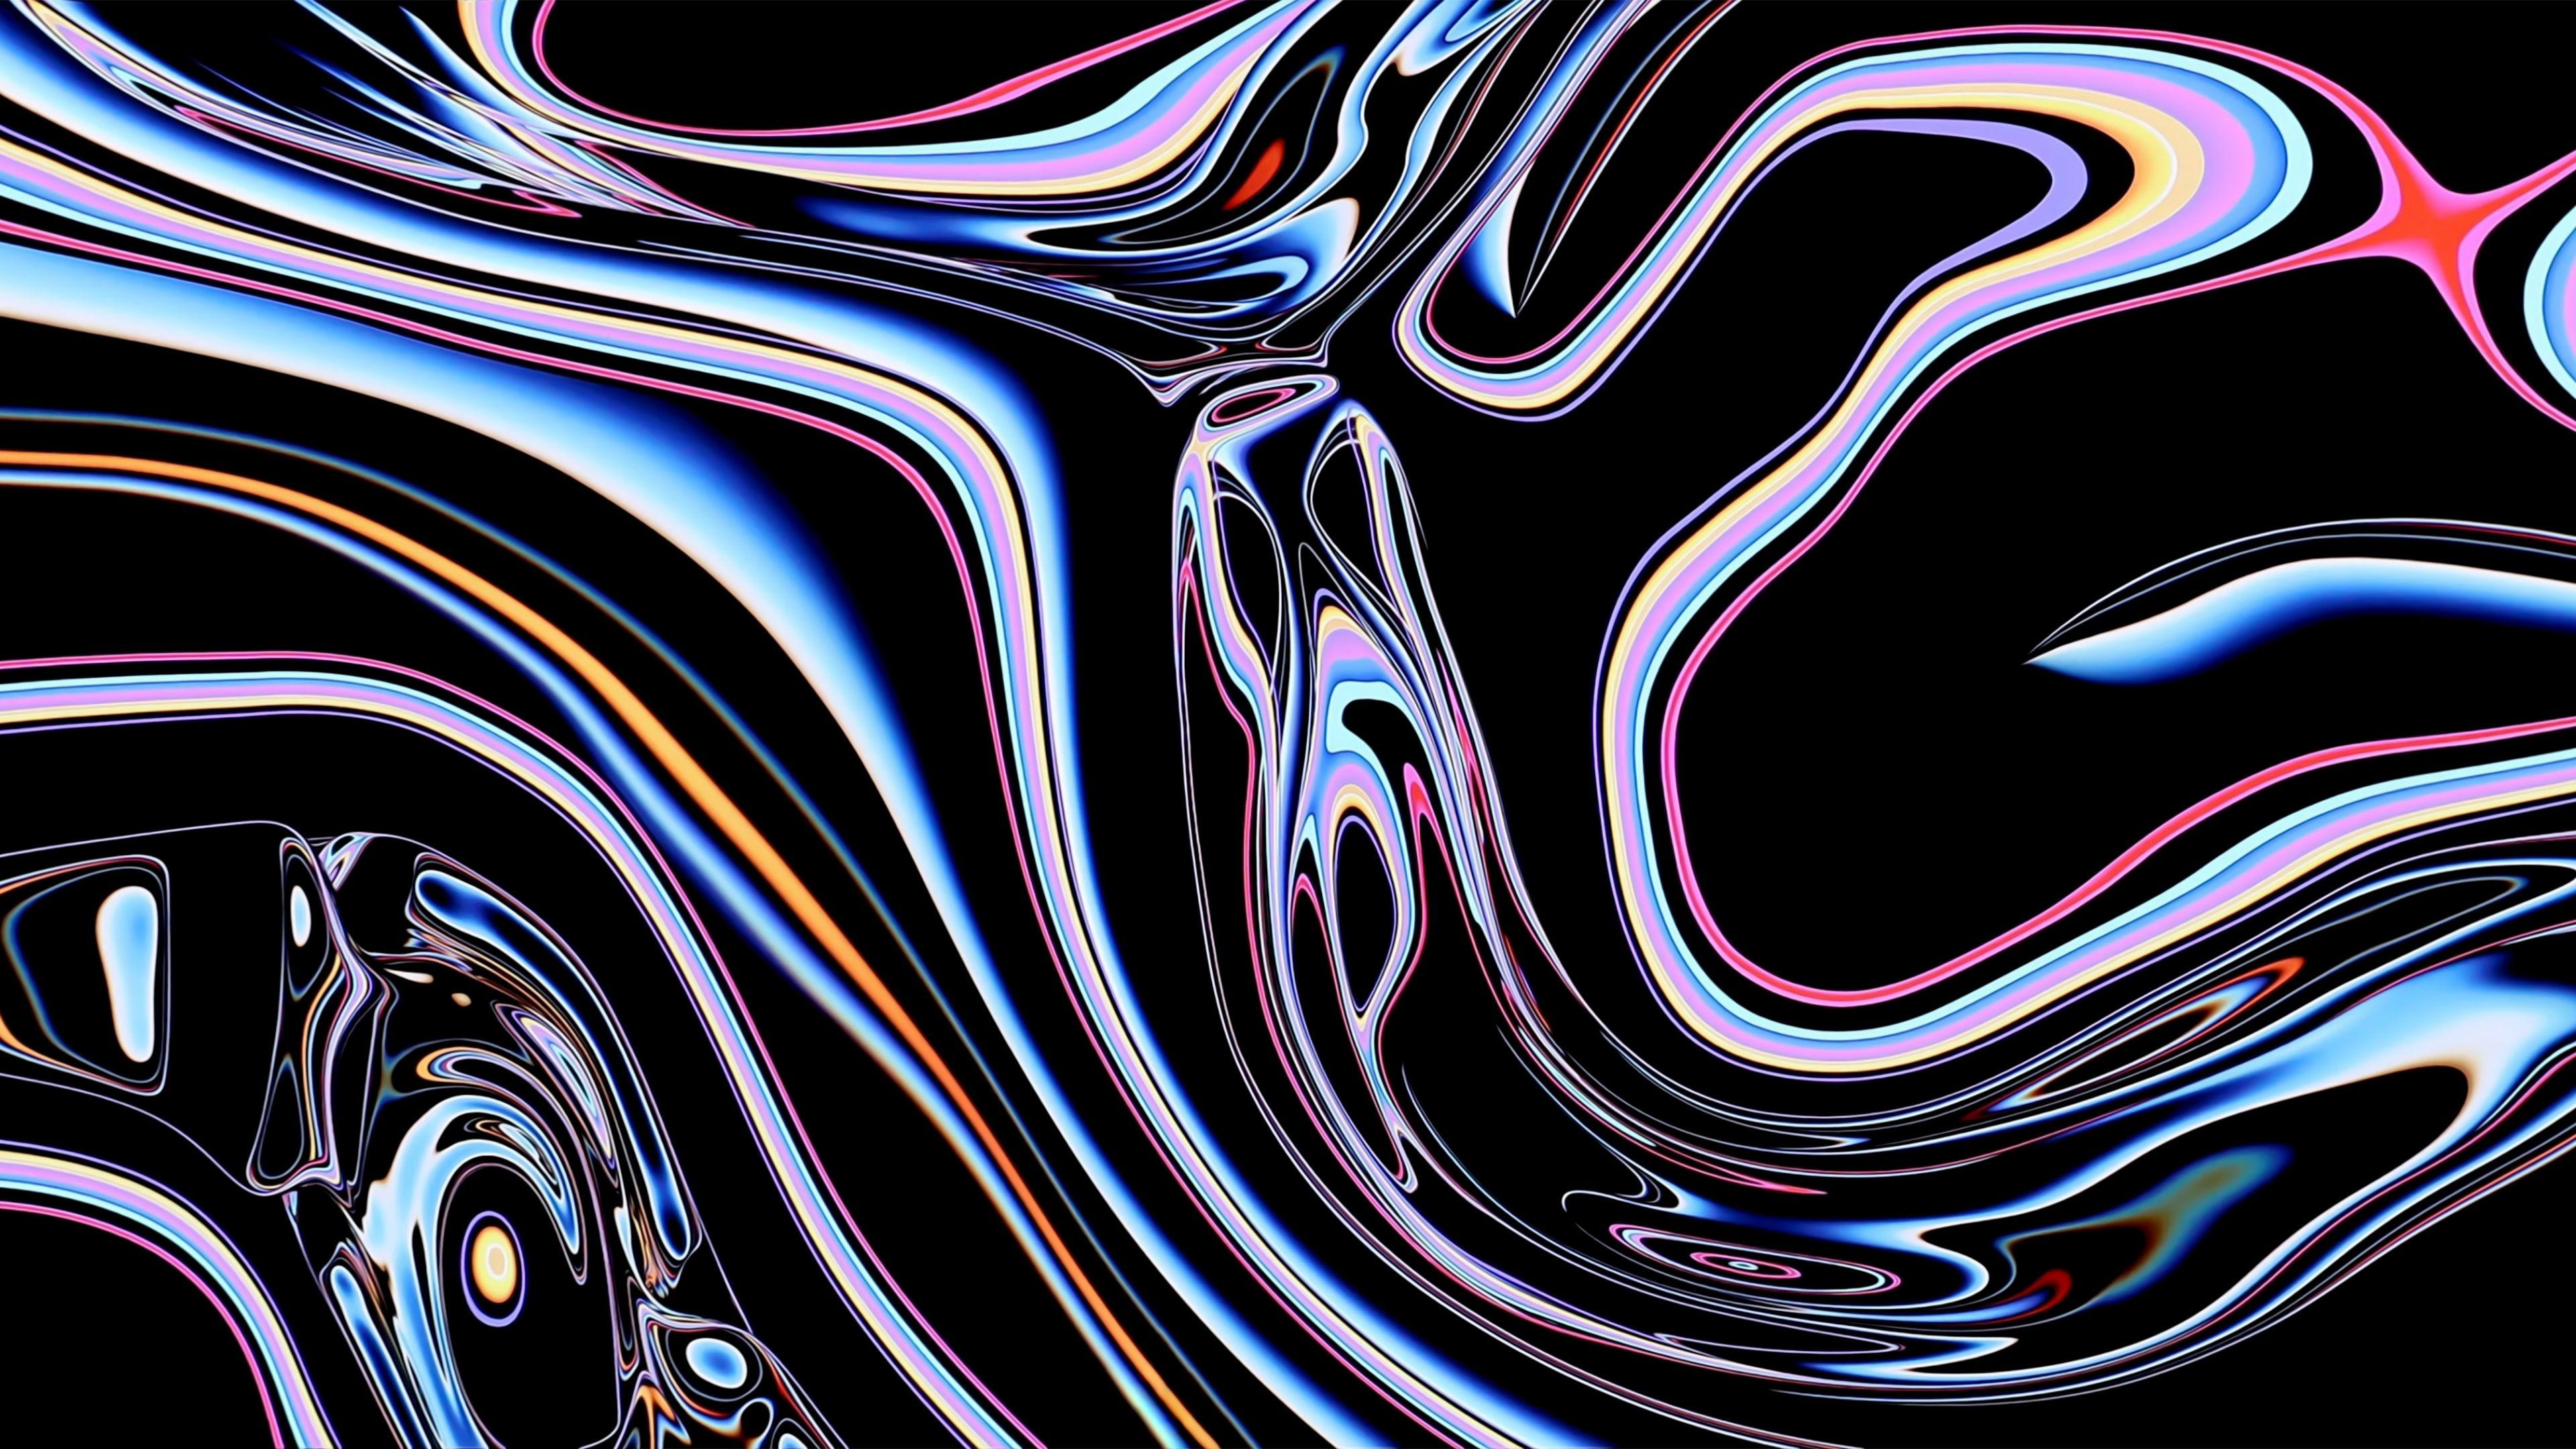 Psychedelic Wallpaper 4K, Apple Pro Display XDR, Stock